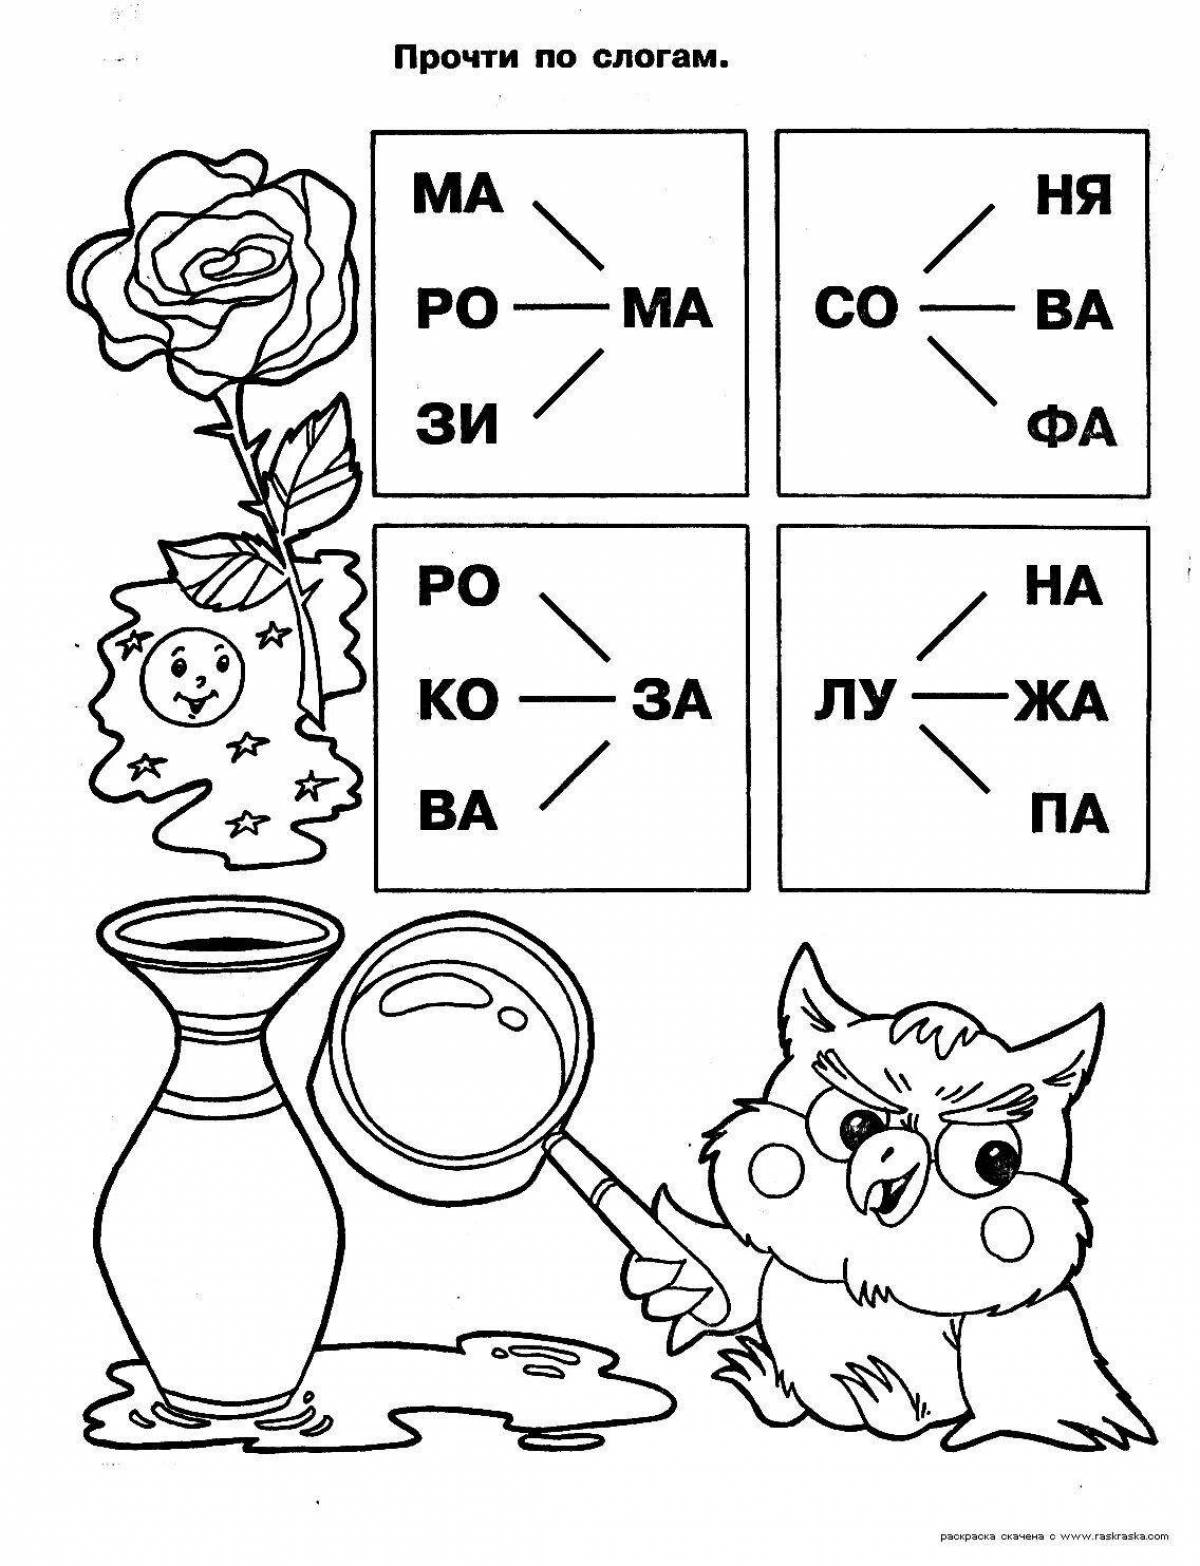 Colorful syllable coloring pages for preschoolers